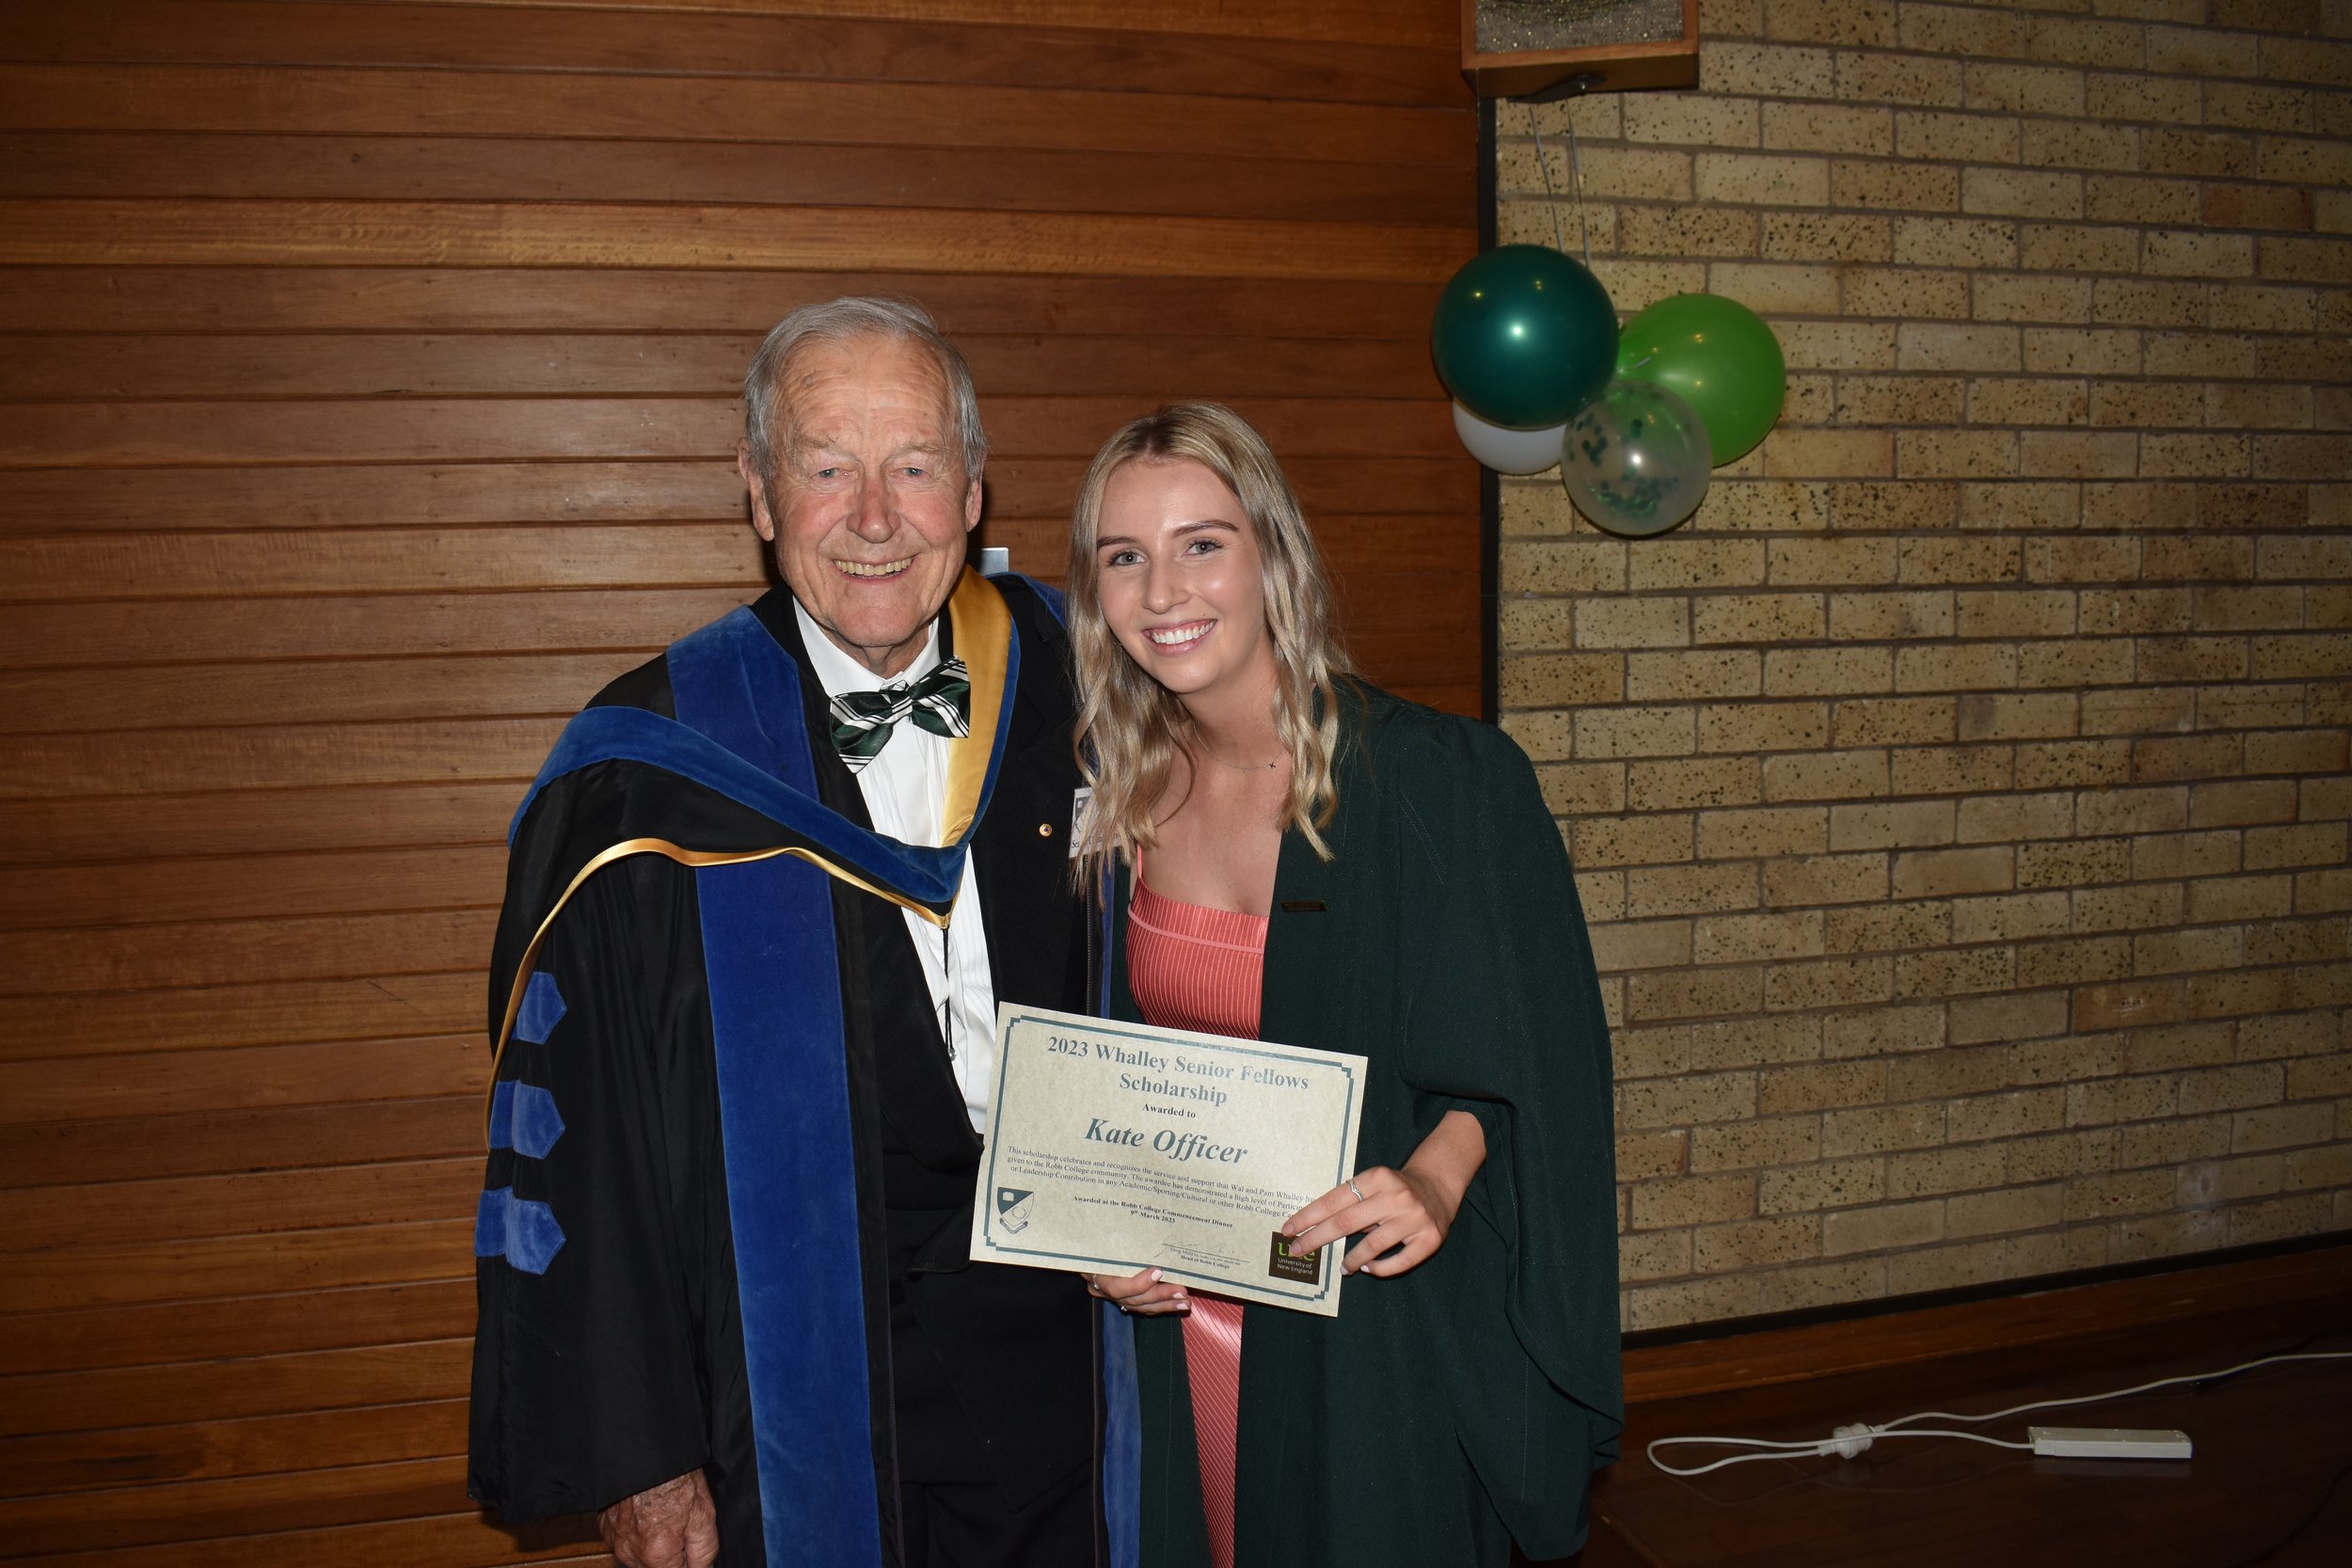 The Wal & Pam Whalley Senior Fellows Scholarship presented to Kate Officer B Agribusiness by Emeritus Prof Wal Whalley AO 	